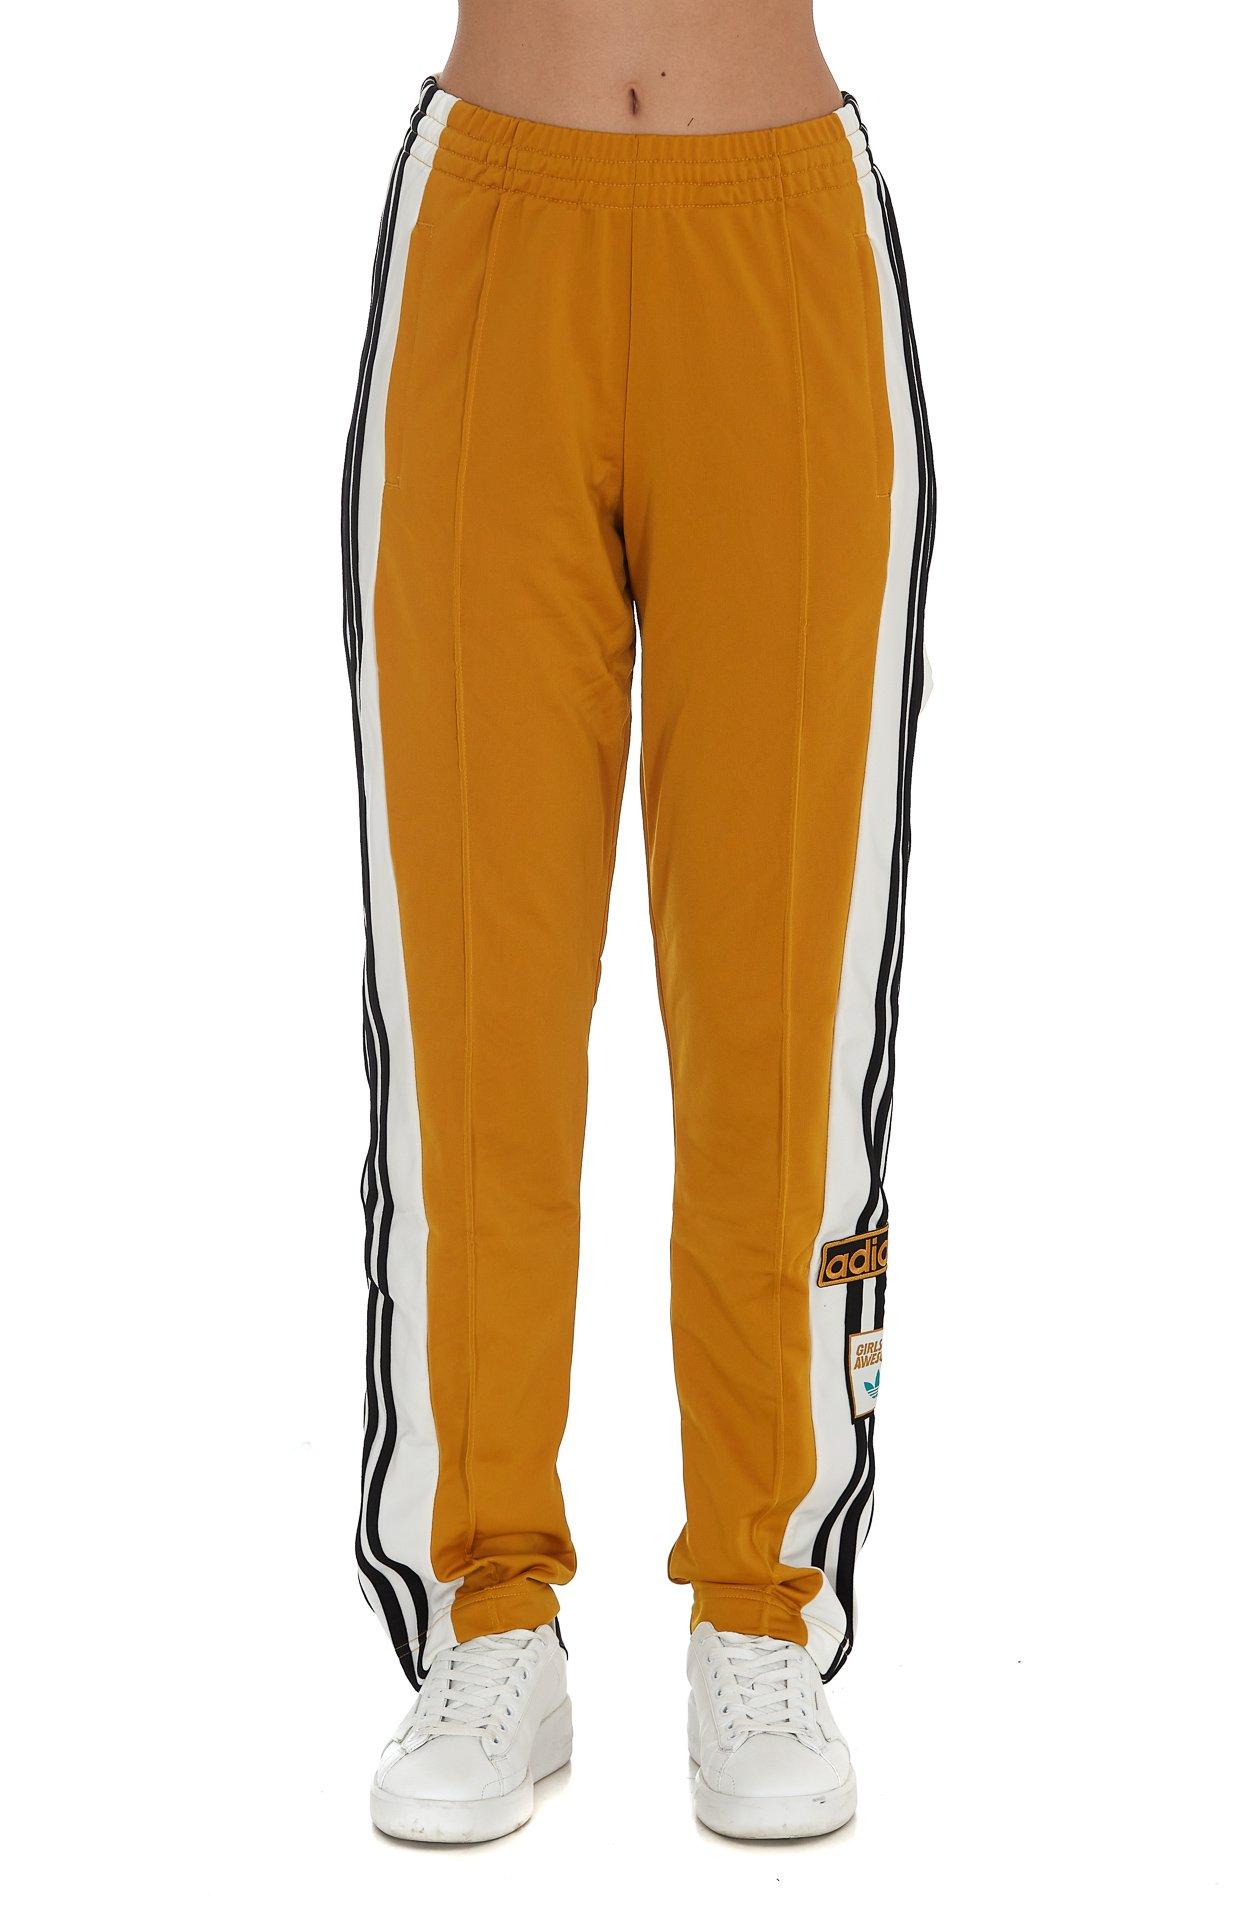 adidas Originals Girls Are Awesome Adibreak Pants in Yellow | Lyst